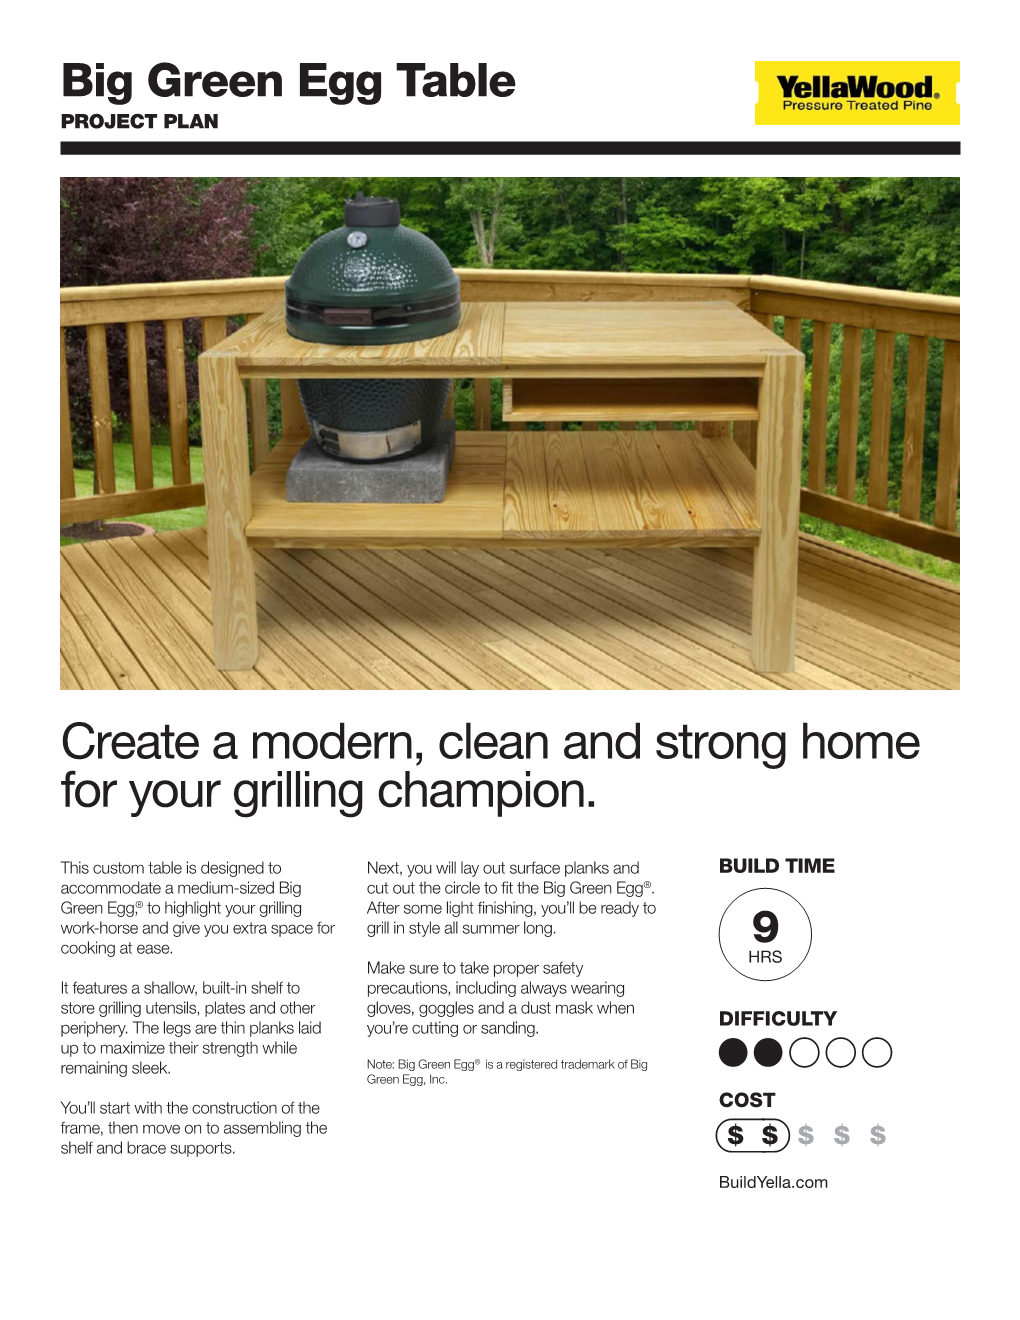 Create a Modern, Clean and Strong Home for Your Grilling Champion